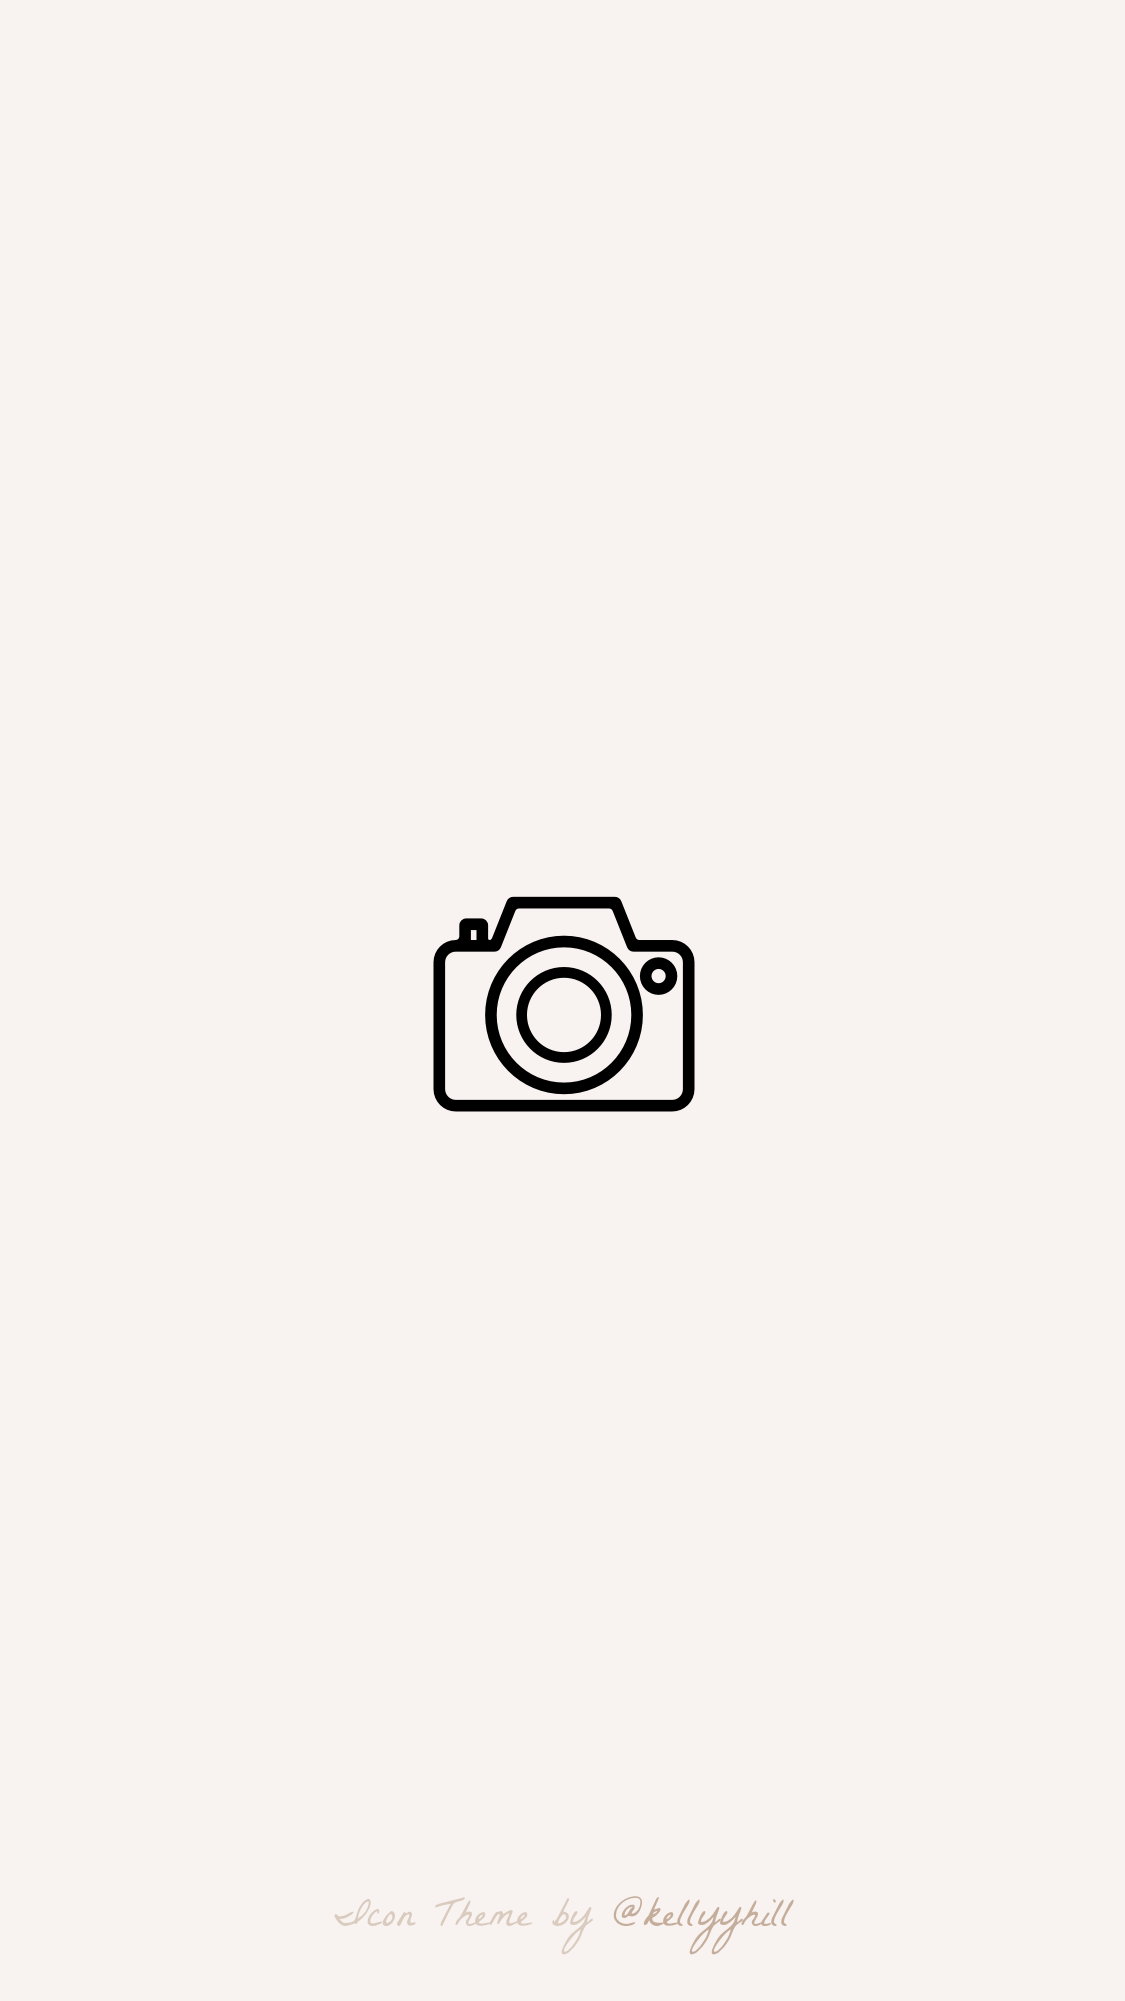 Kelly Hill Instagram Highlights City 06 Icon. Free instagram, Instagram icons, Instagram highlight icons